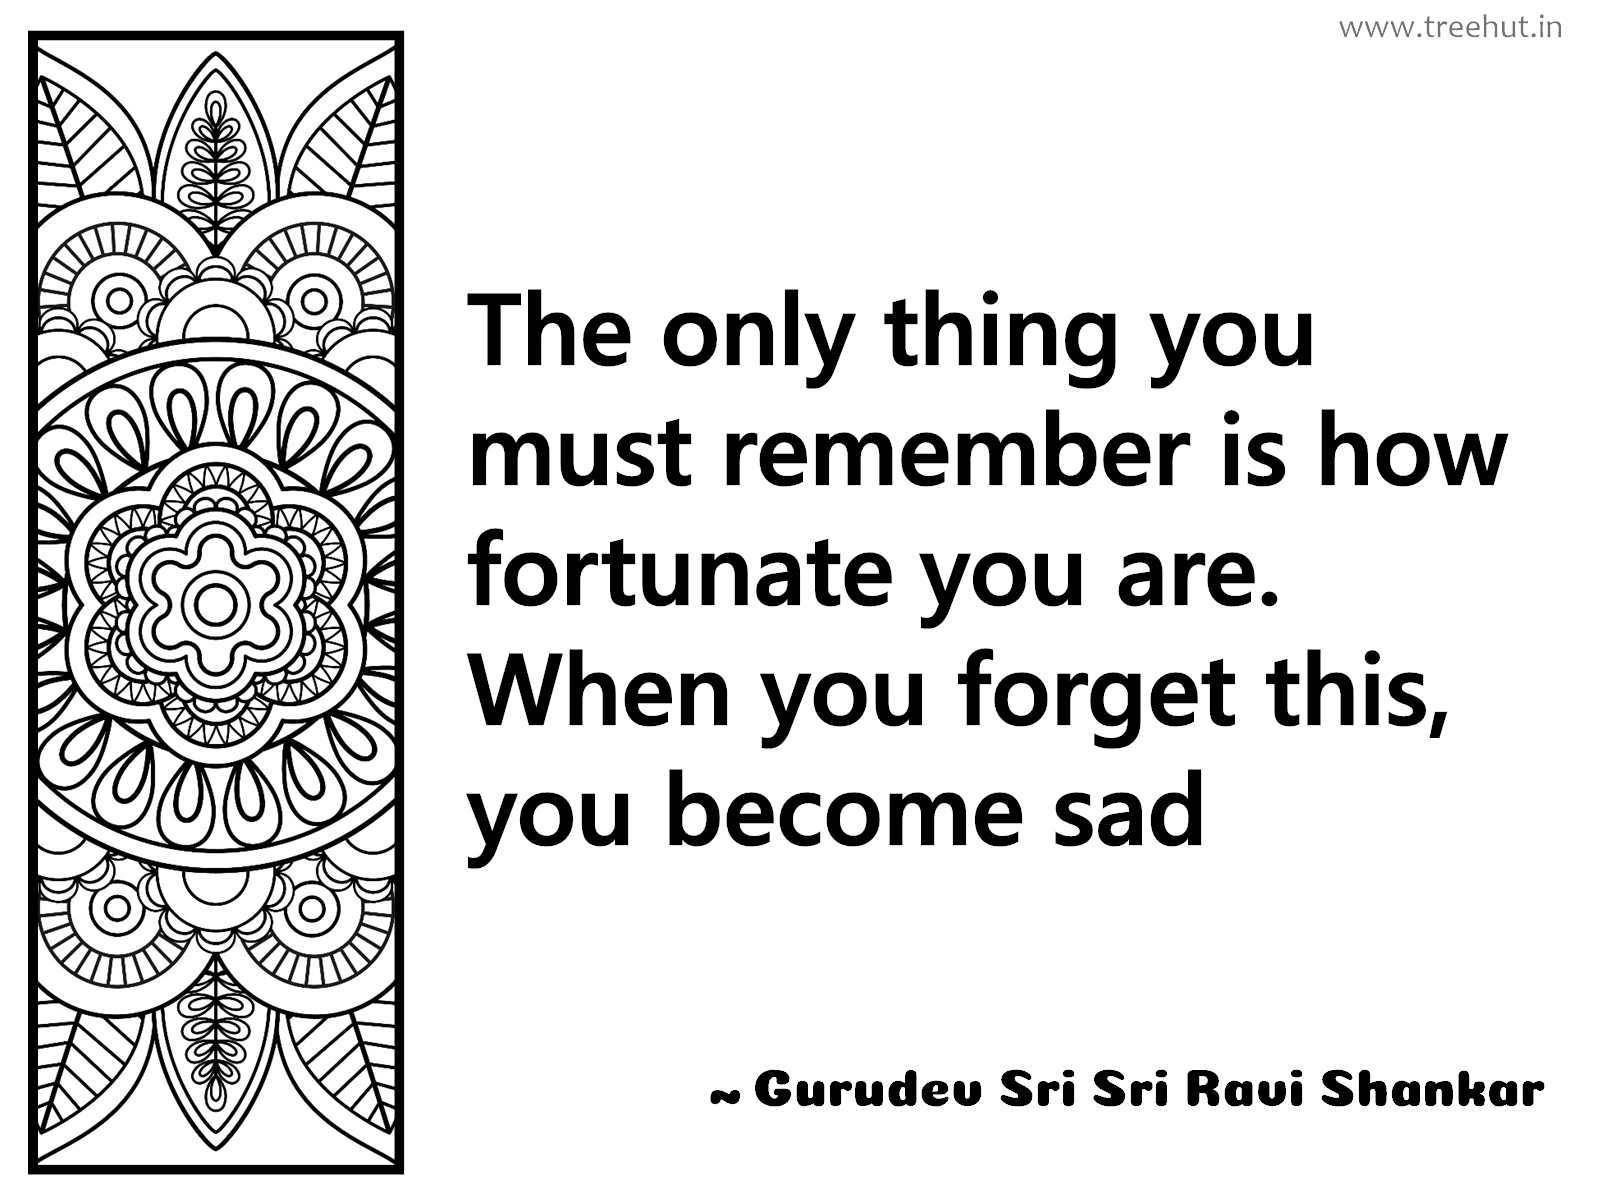 The only thing you must remember is how fortunate you are. When you forget this, you become sad Inspirational Quote by Gurudev Sri Sri Ravi Shankar, coloring pages